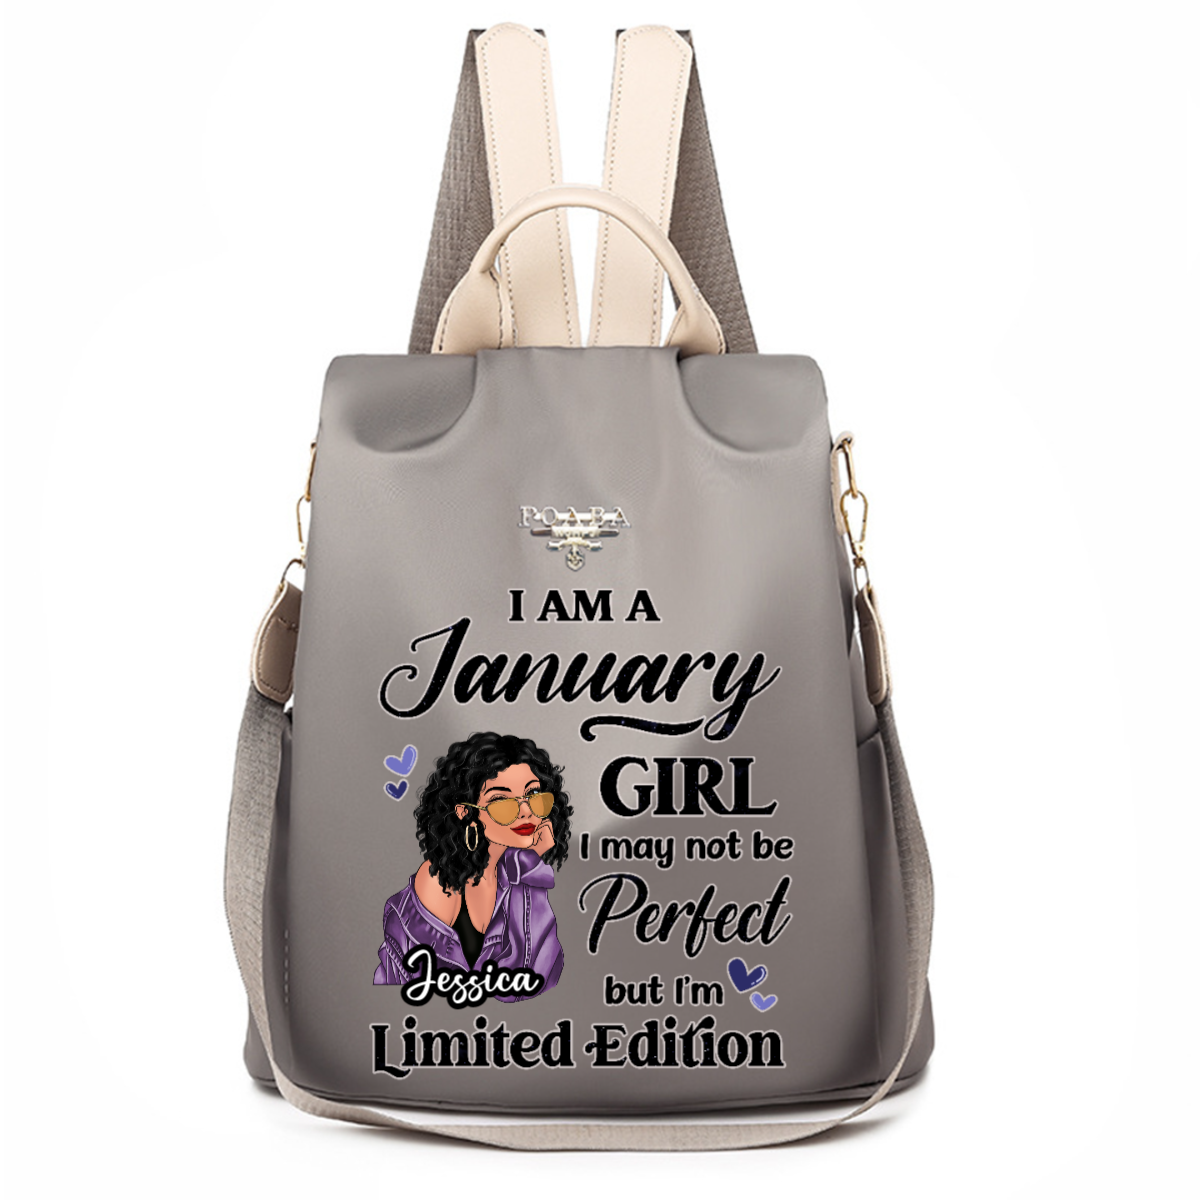 Birthday Gift Birth Month Fashion Girl Limited Edition Personalized Backpack